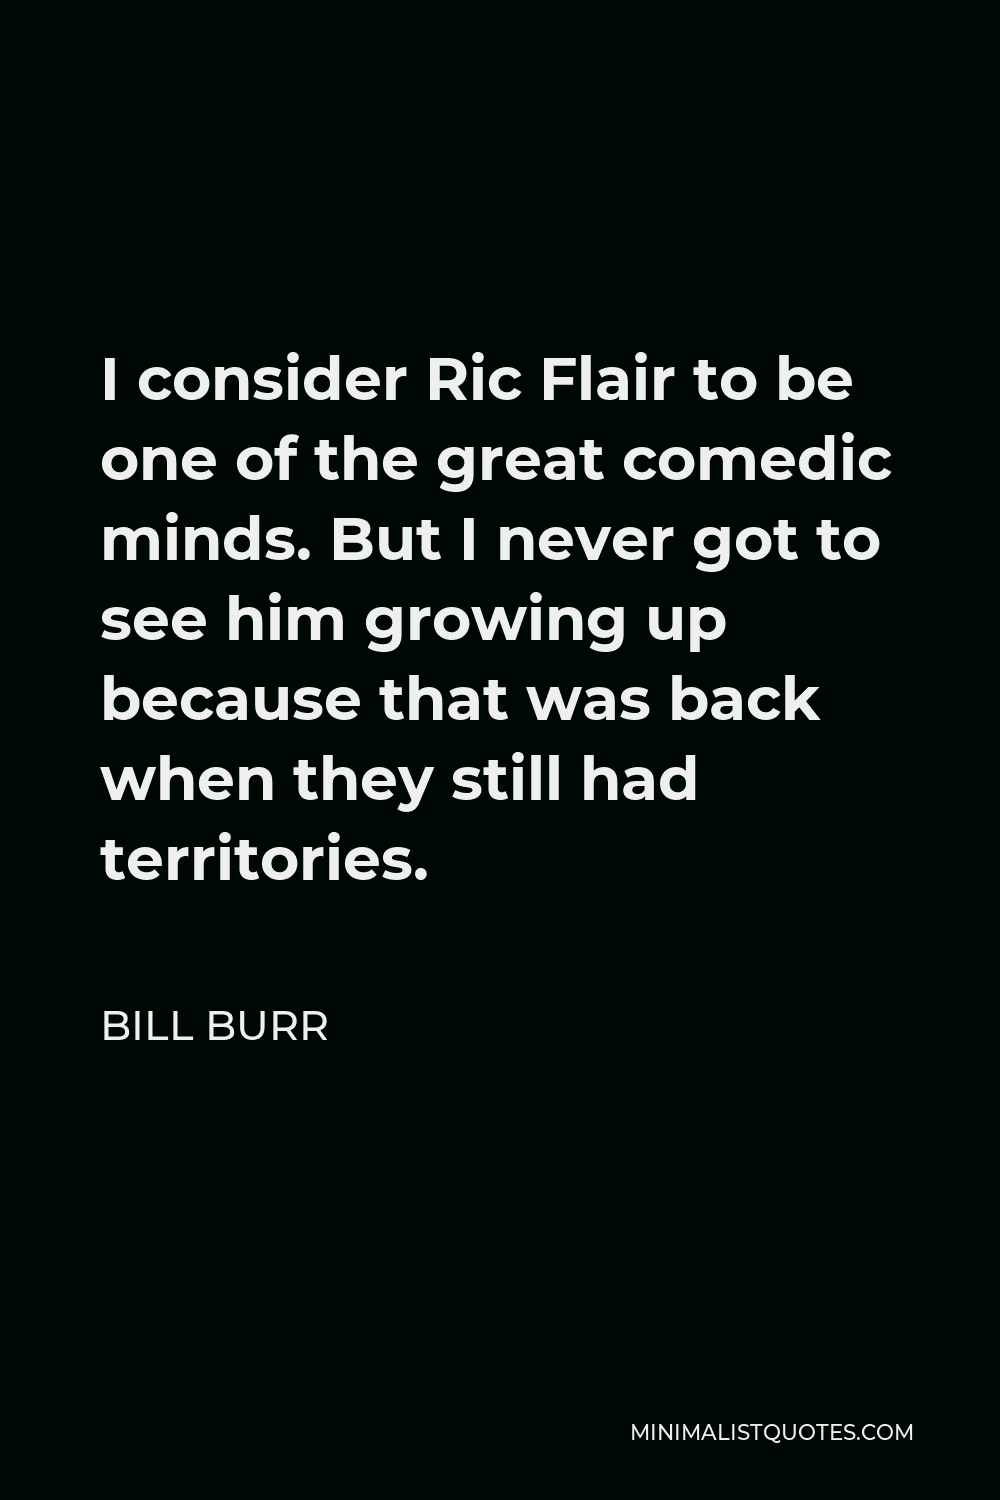 Bill Burr Quote - I consider Ric Flair to be one of the great comedic minds. But I never got to see him growing up because that was back when they still had territories.